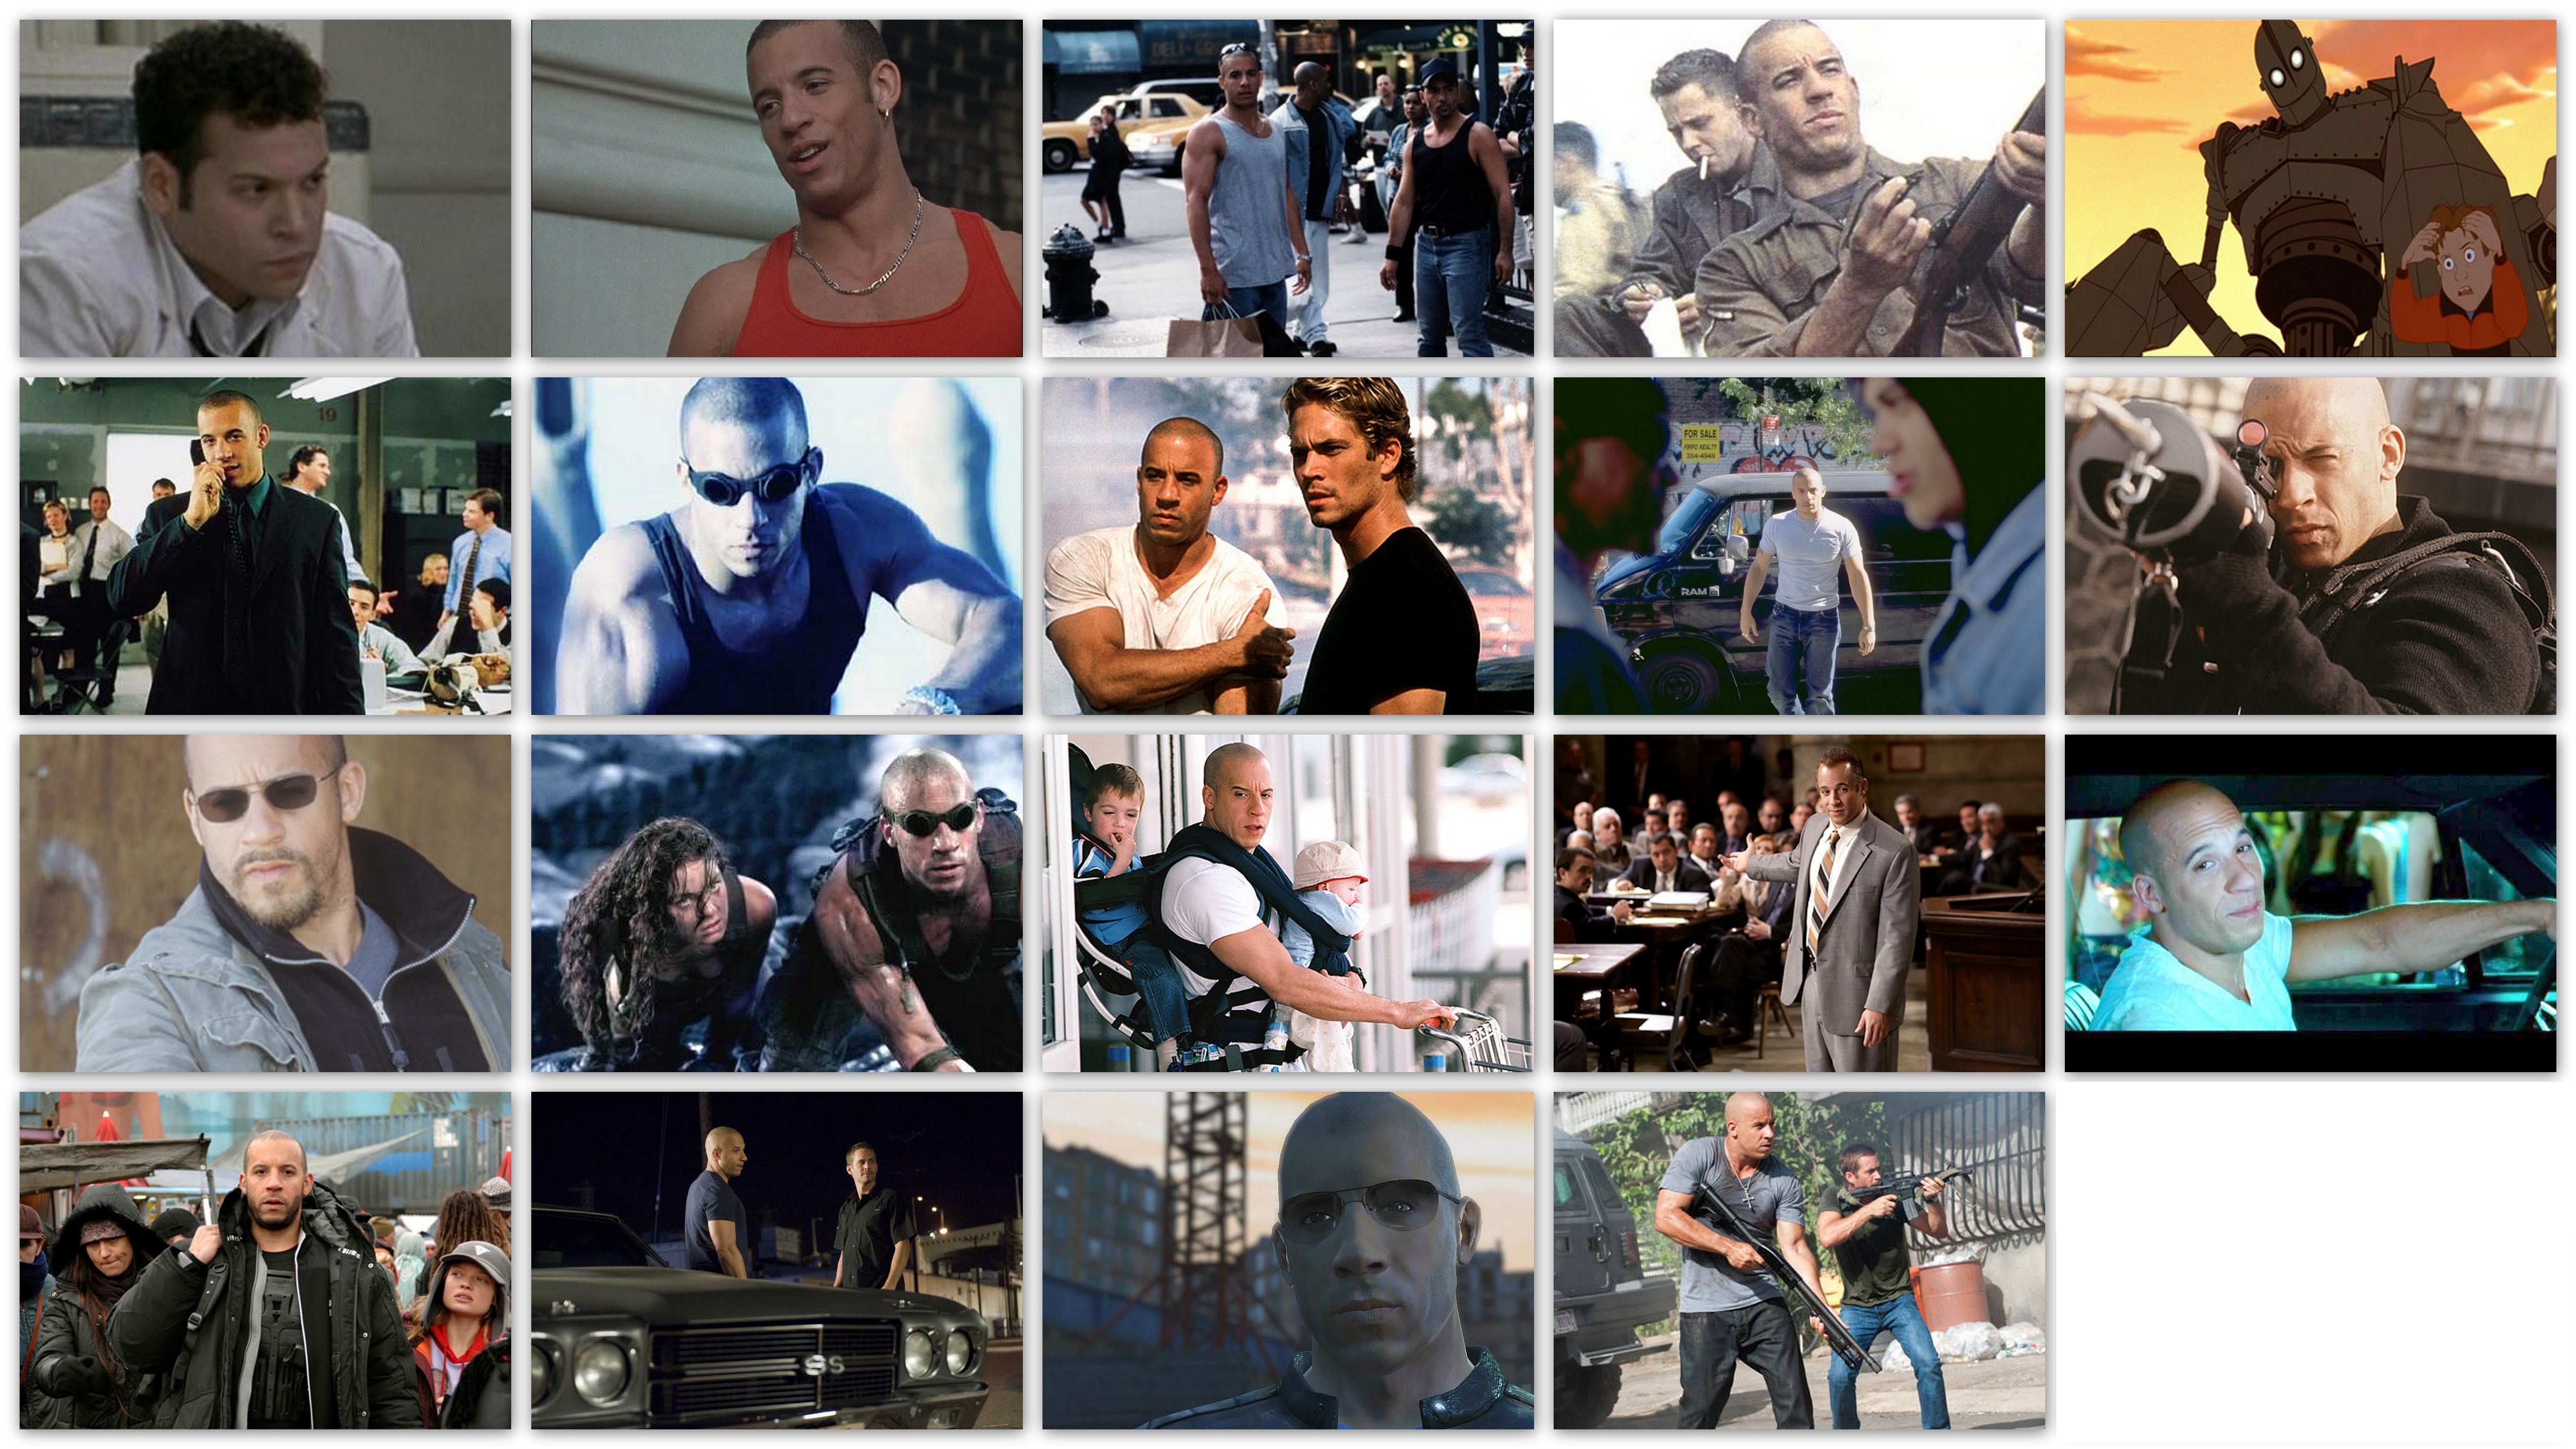 Overview of the roles of actor Vin Diesel in his movies